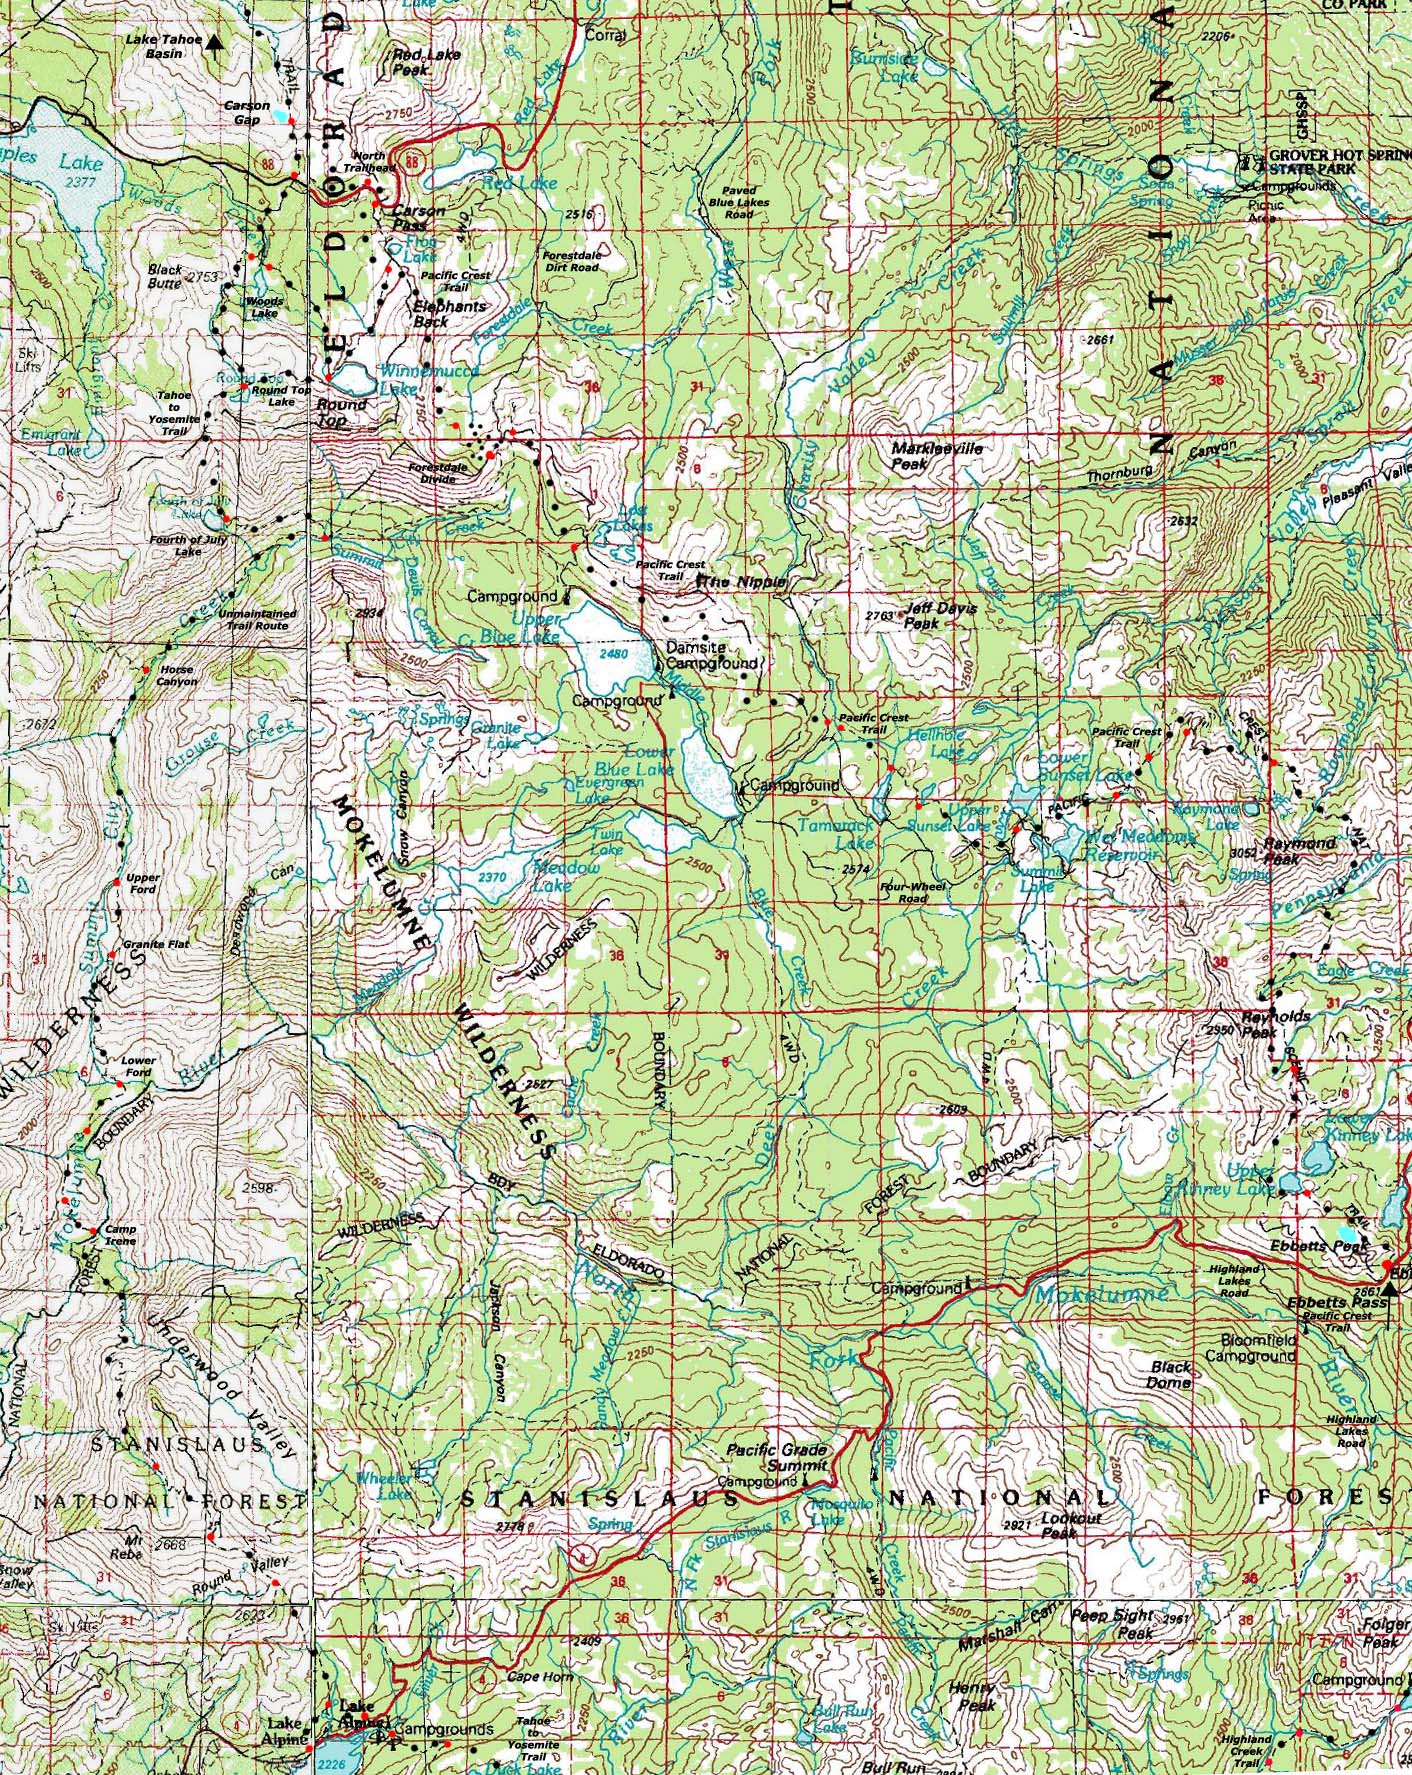 Mokelumne Wilderness topo hiking map. Pacific Crest Trail and Tahoe to Yosemite Trail.